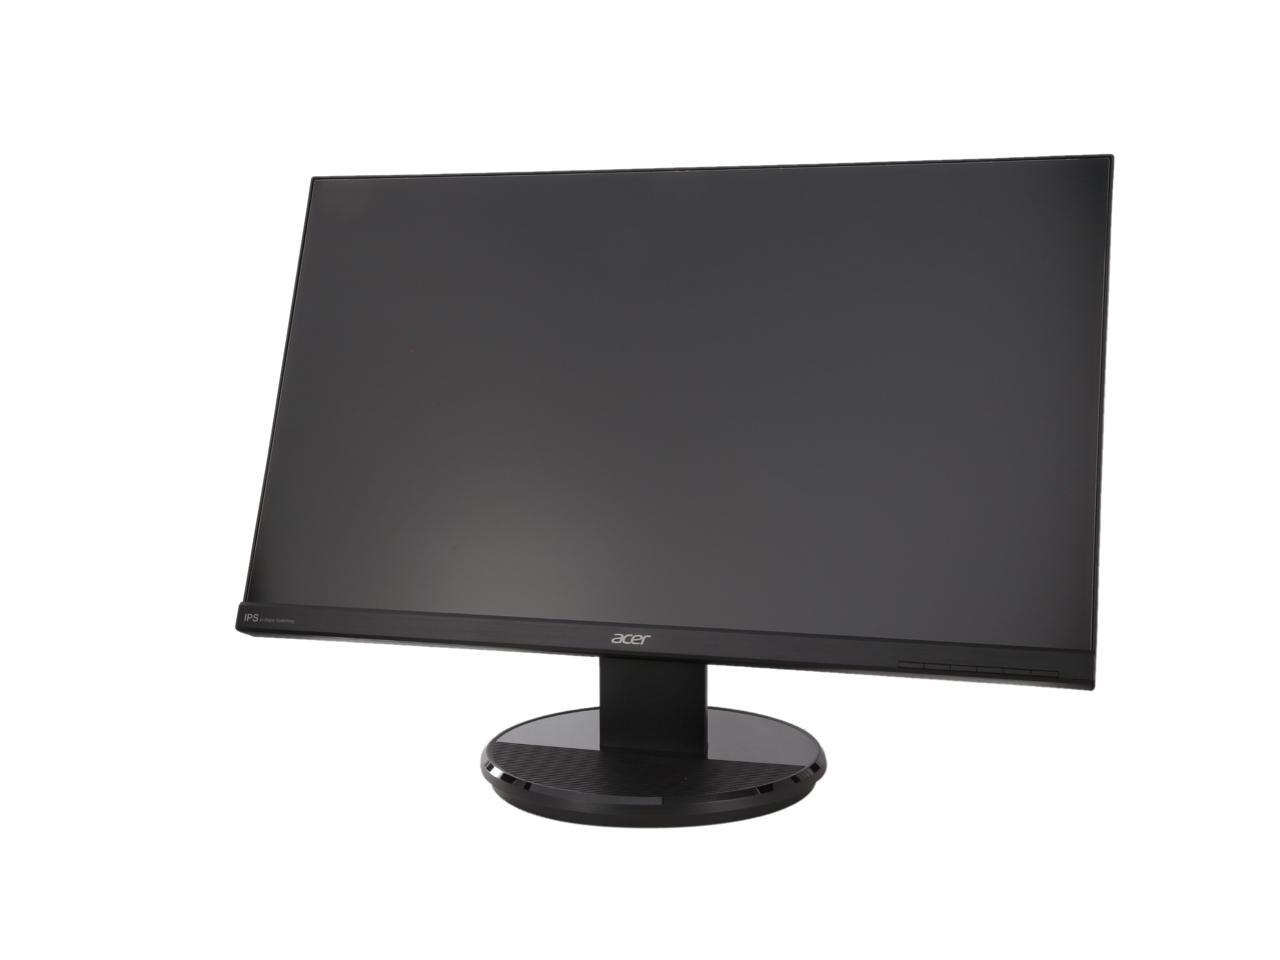 Widescreen LCD/LED Monitor IPS Ba Acer Certified K2 Series K272HUL 27" 4ms GTG 